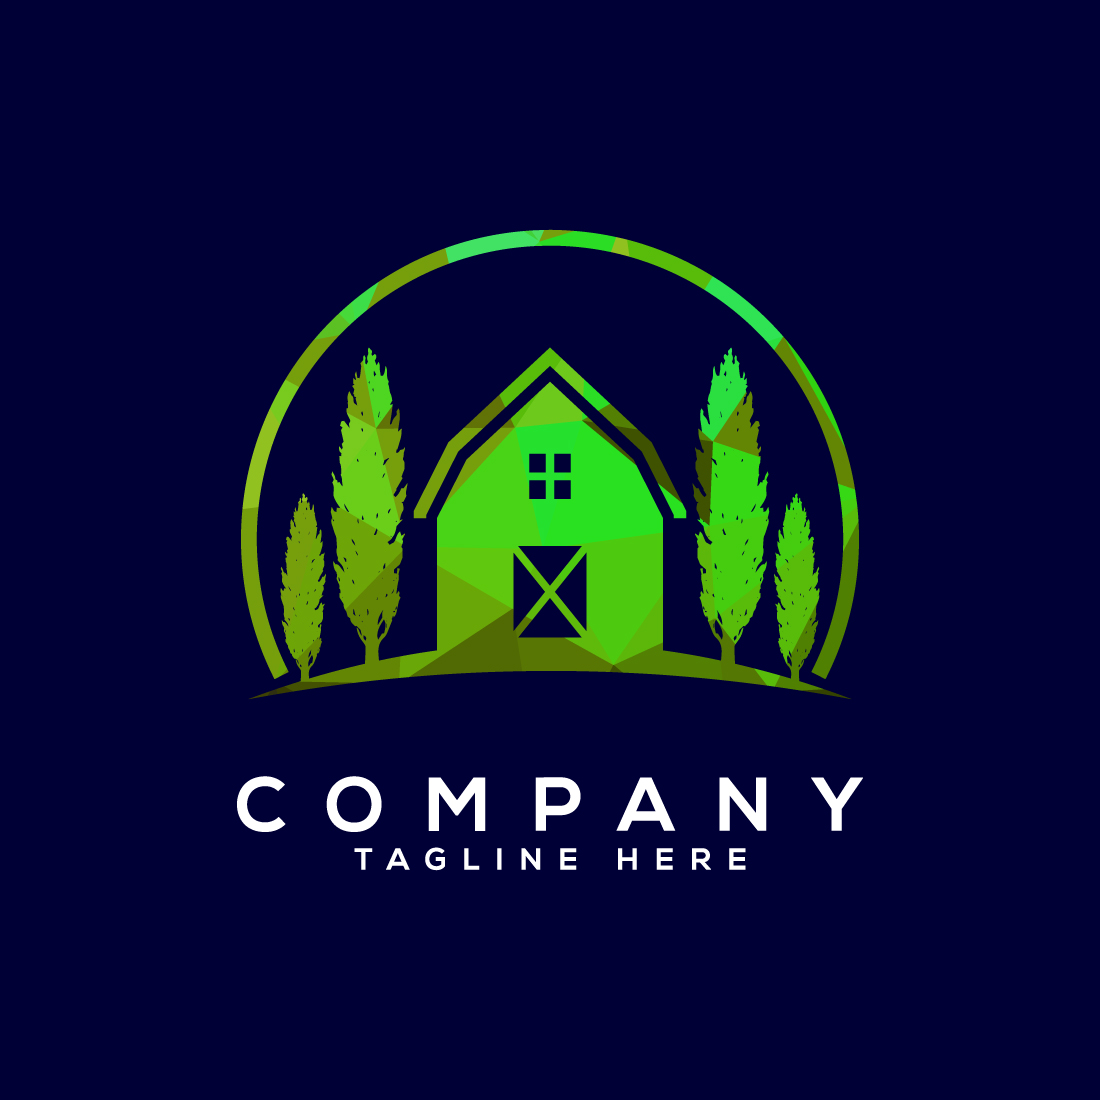 Farm house low poly style logo template, Agriculture icon sign symbol cover image.